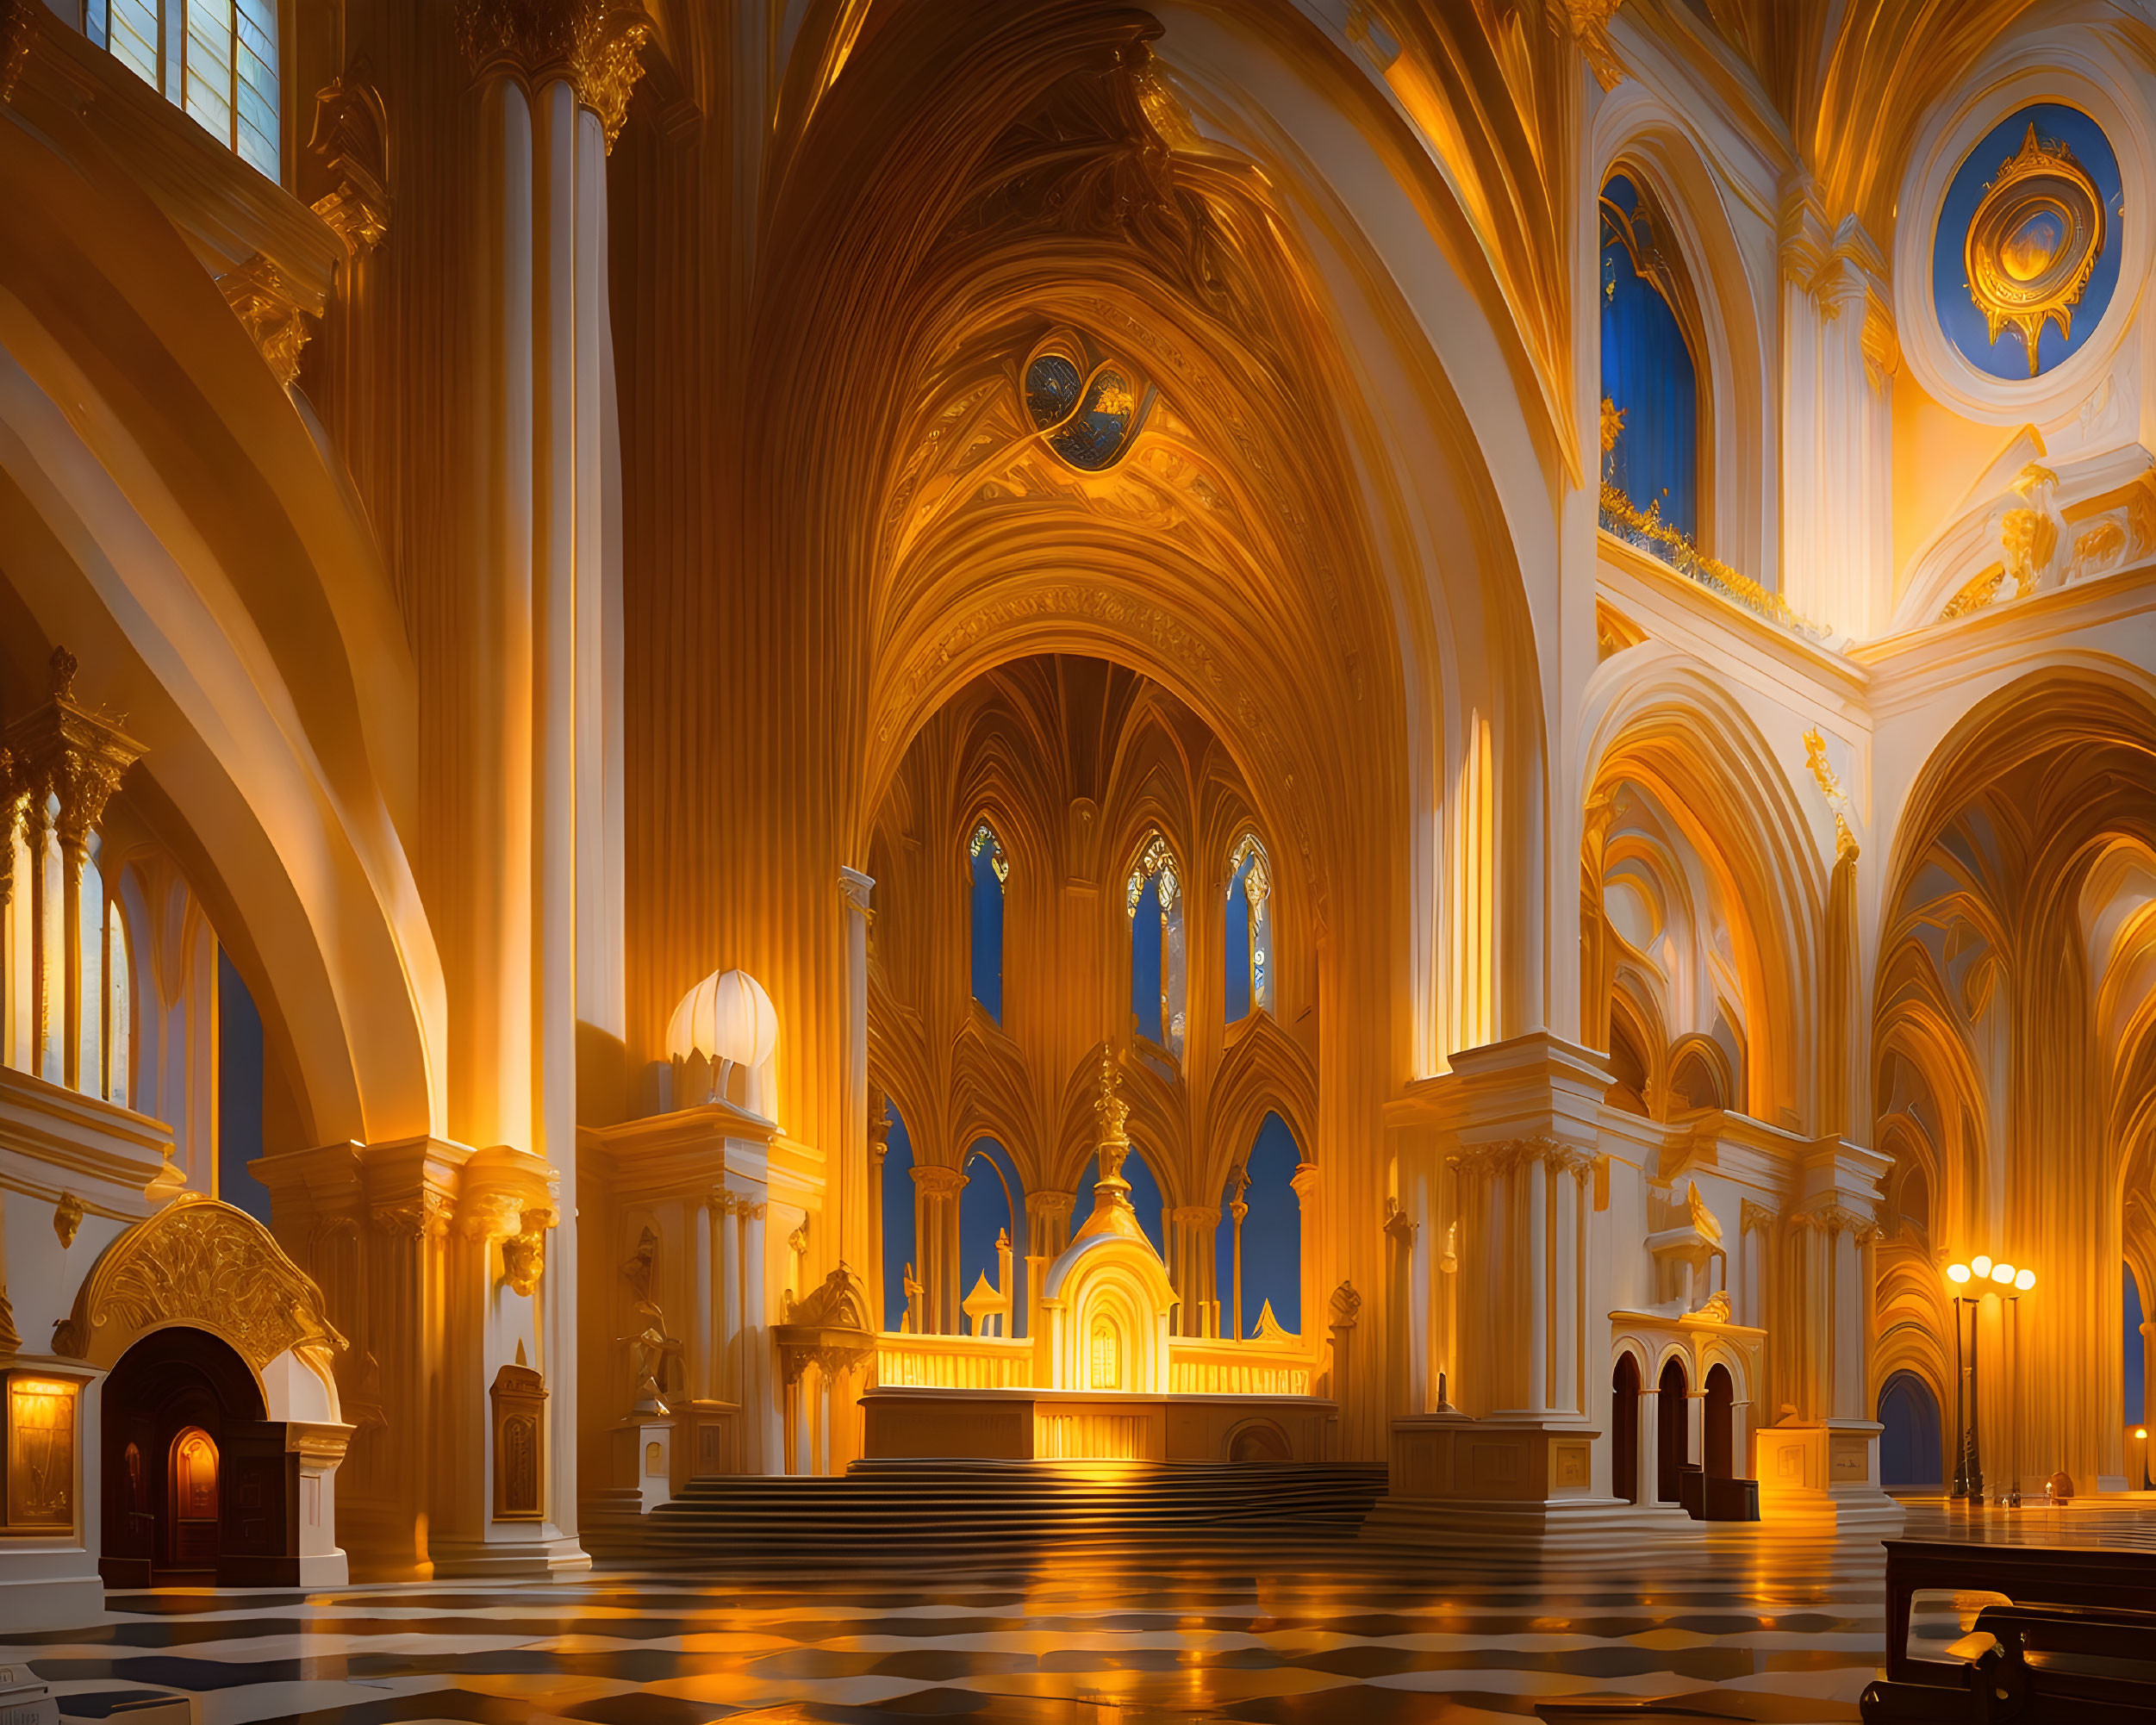 Opulent cathedral interior with soaring arches and intricate gold detailing